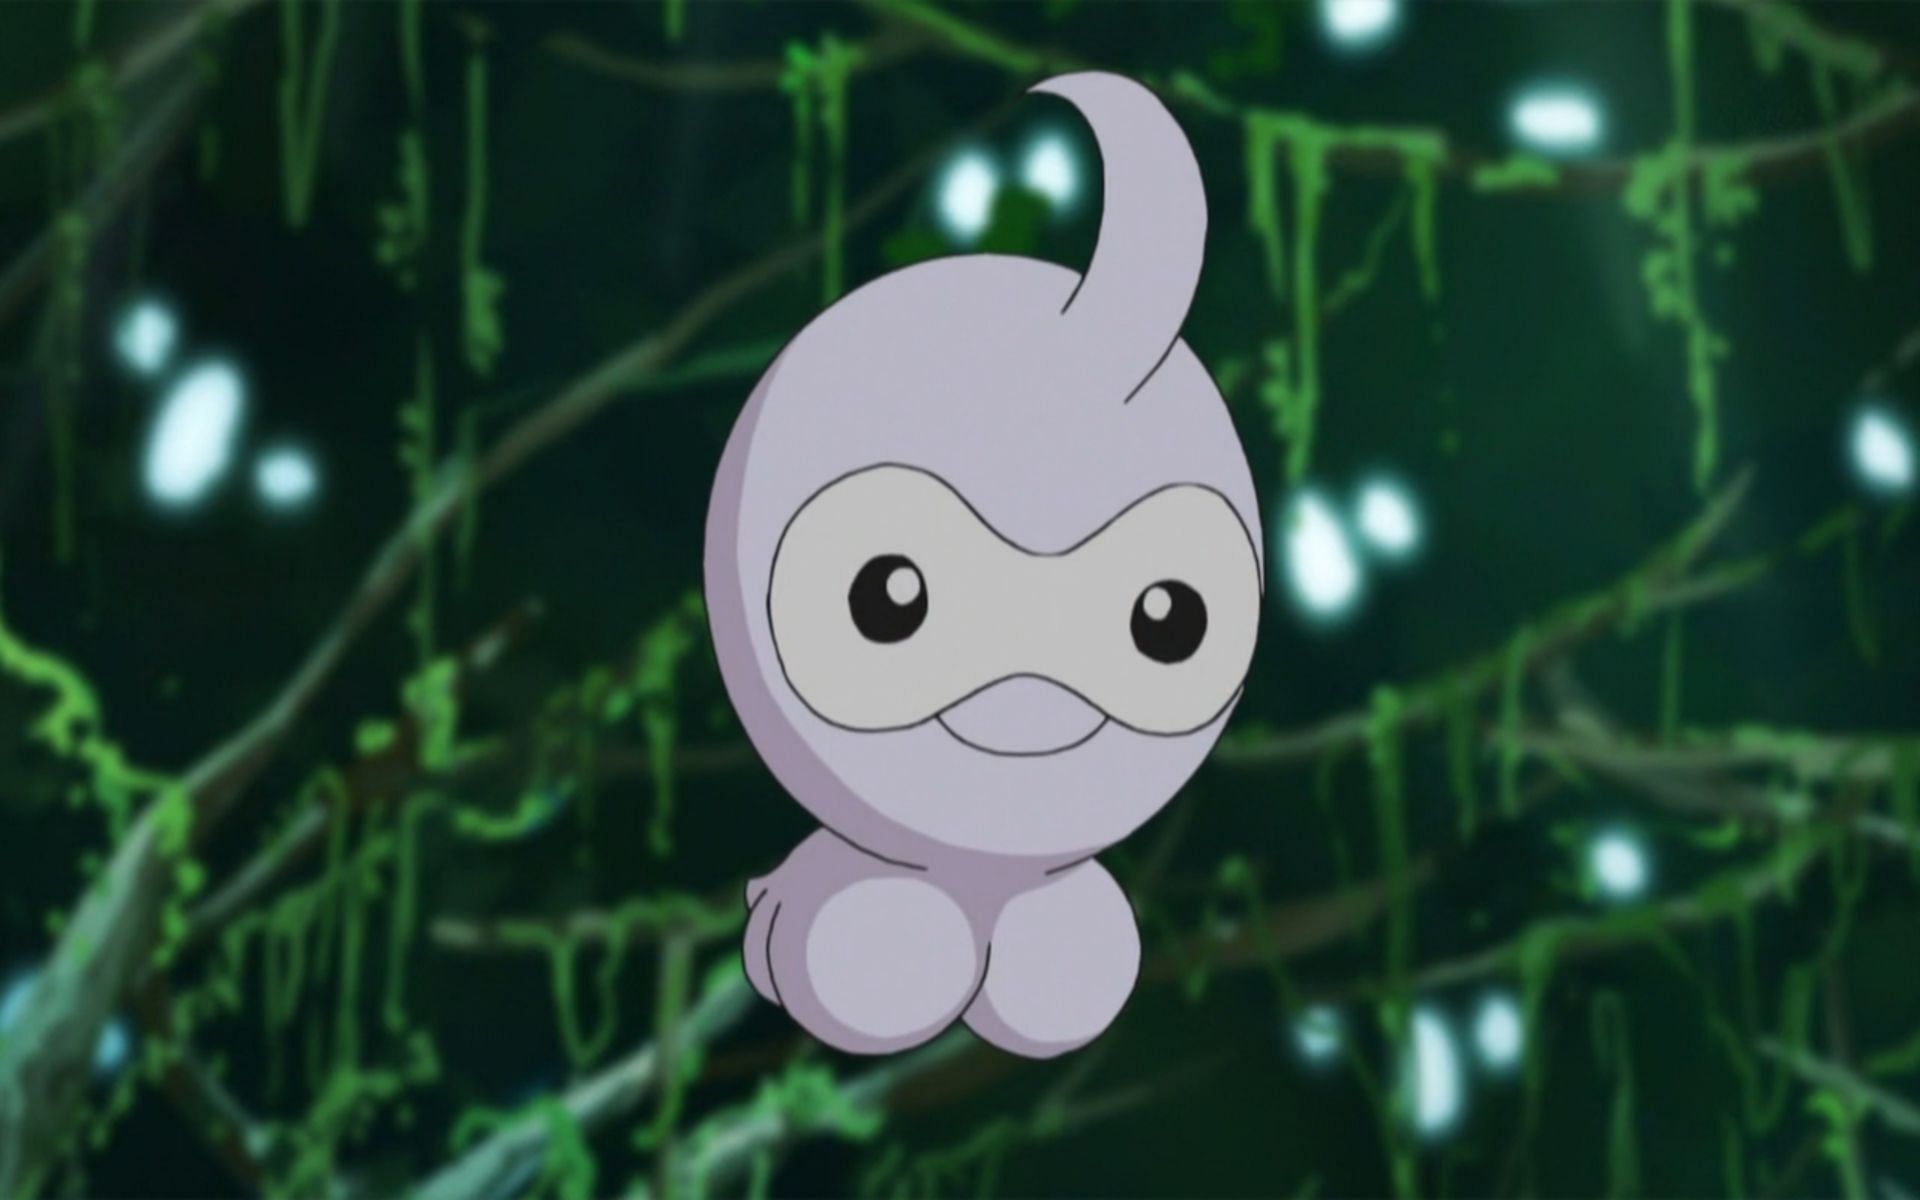 Castform has four different forms in total (Image via The Pokemon Company)